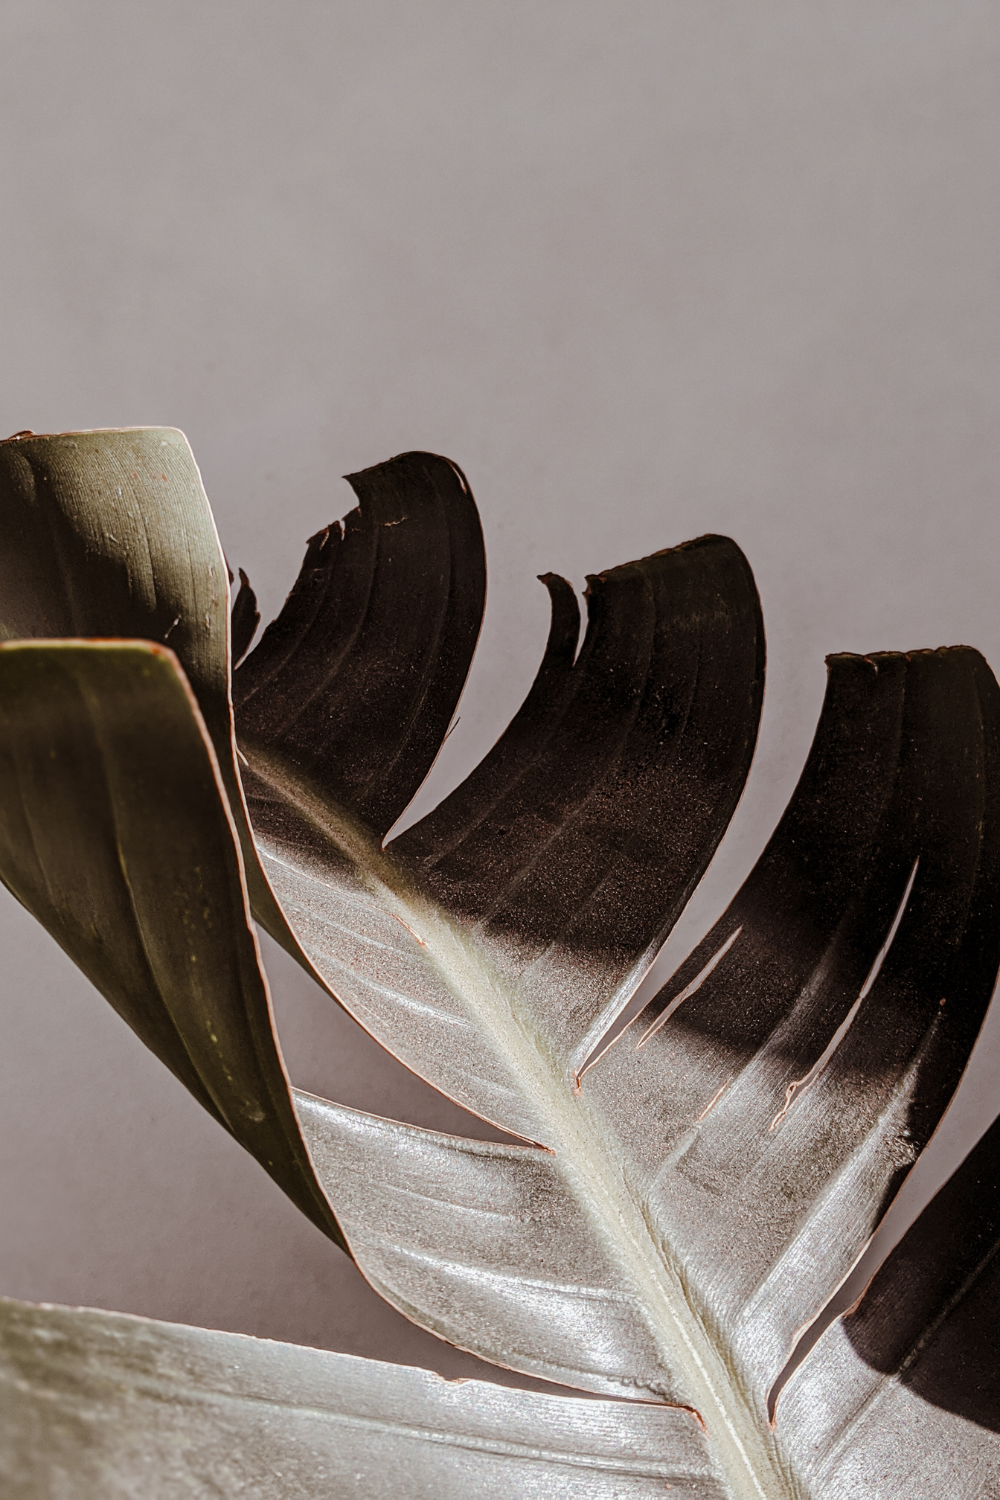 A close-up view of a tropical leaf with visible texture and details, set against a neutral background.